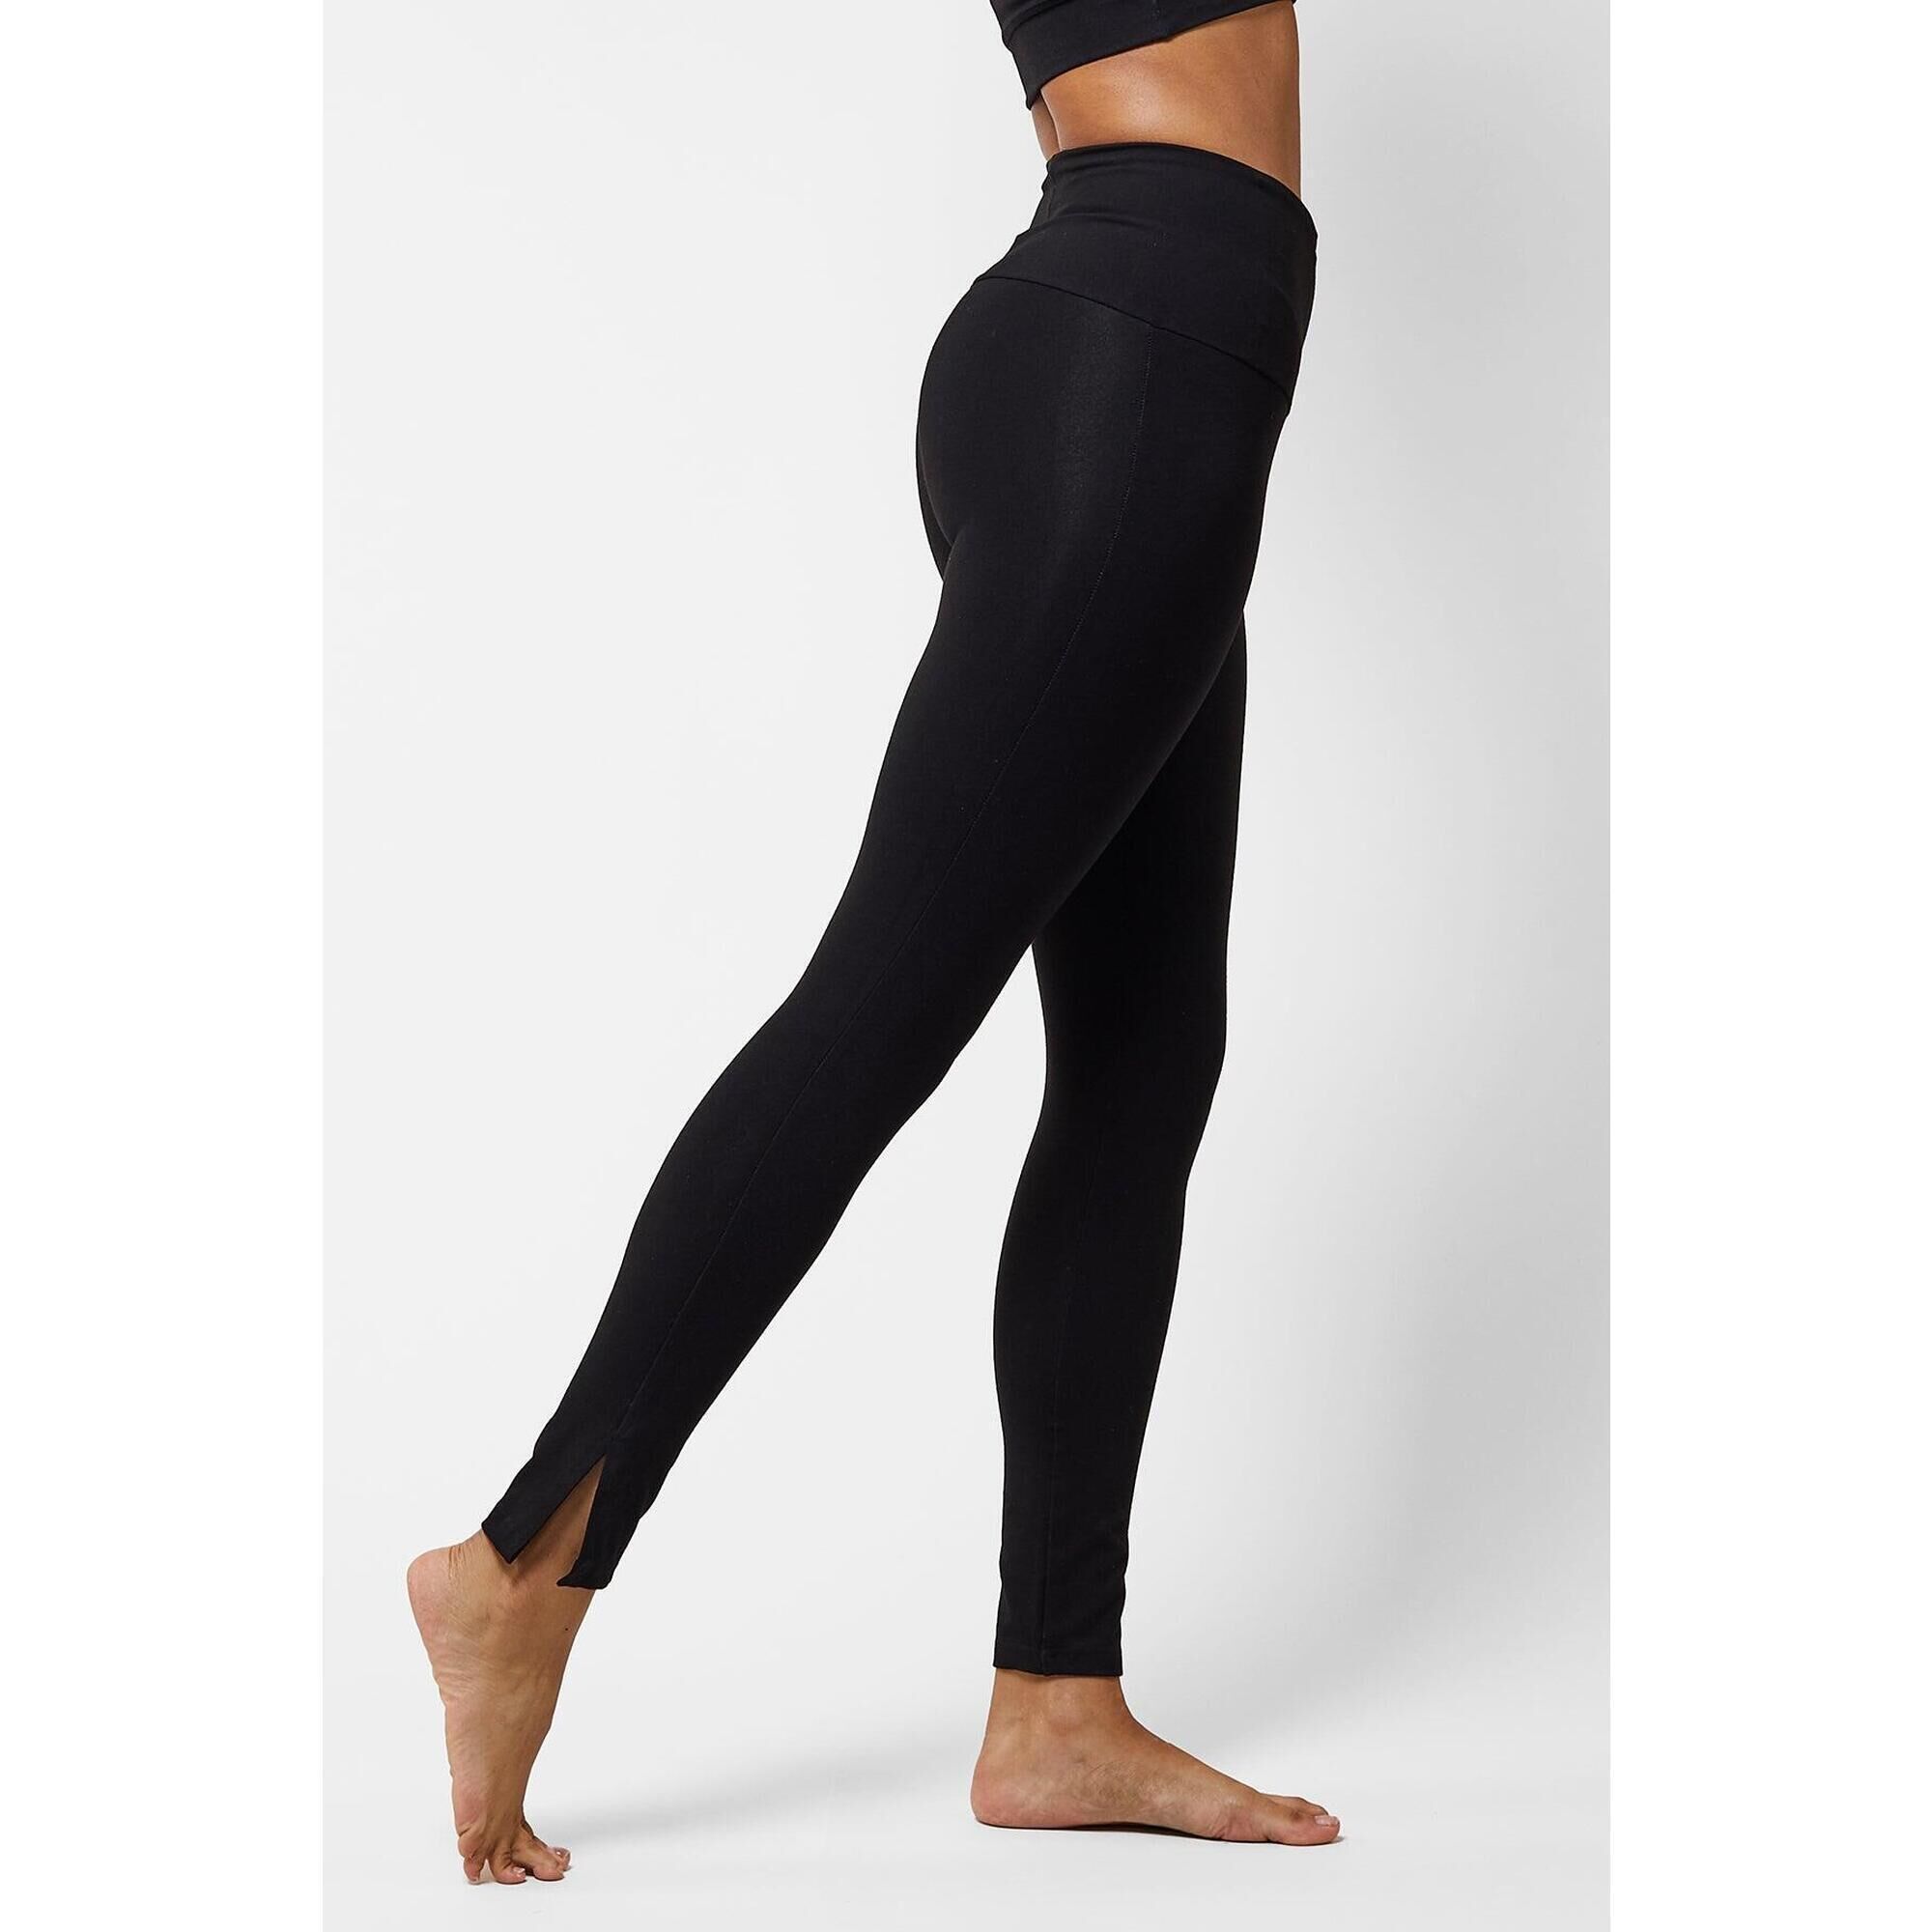 Extra Strong Compression Leggings with High Waist Tummy Control Short Leg  Black